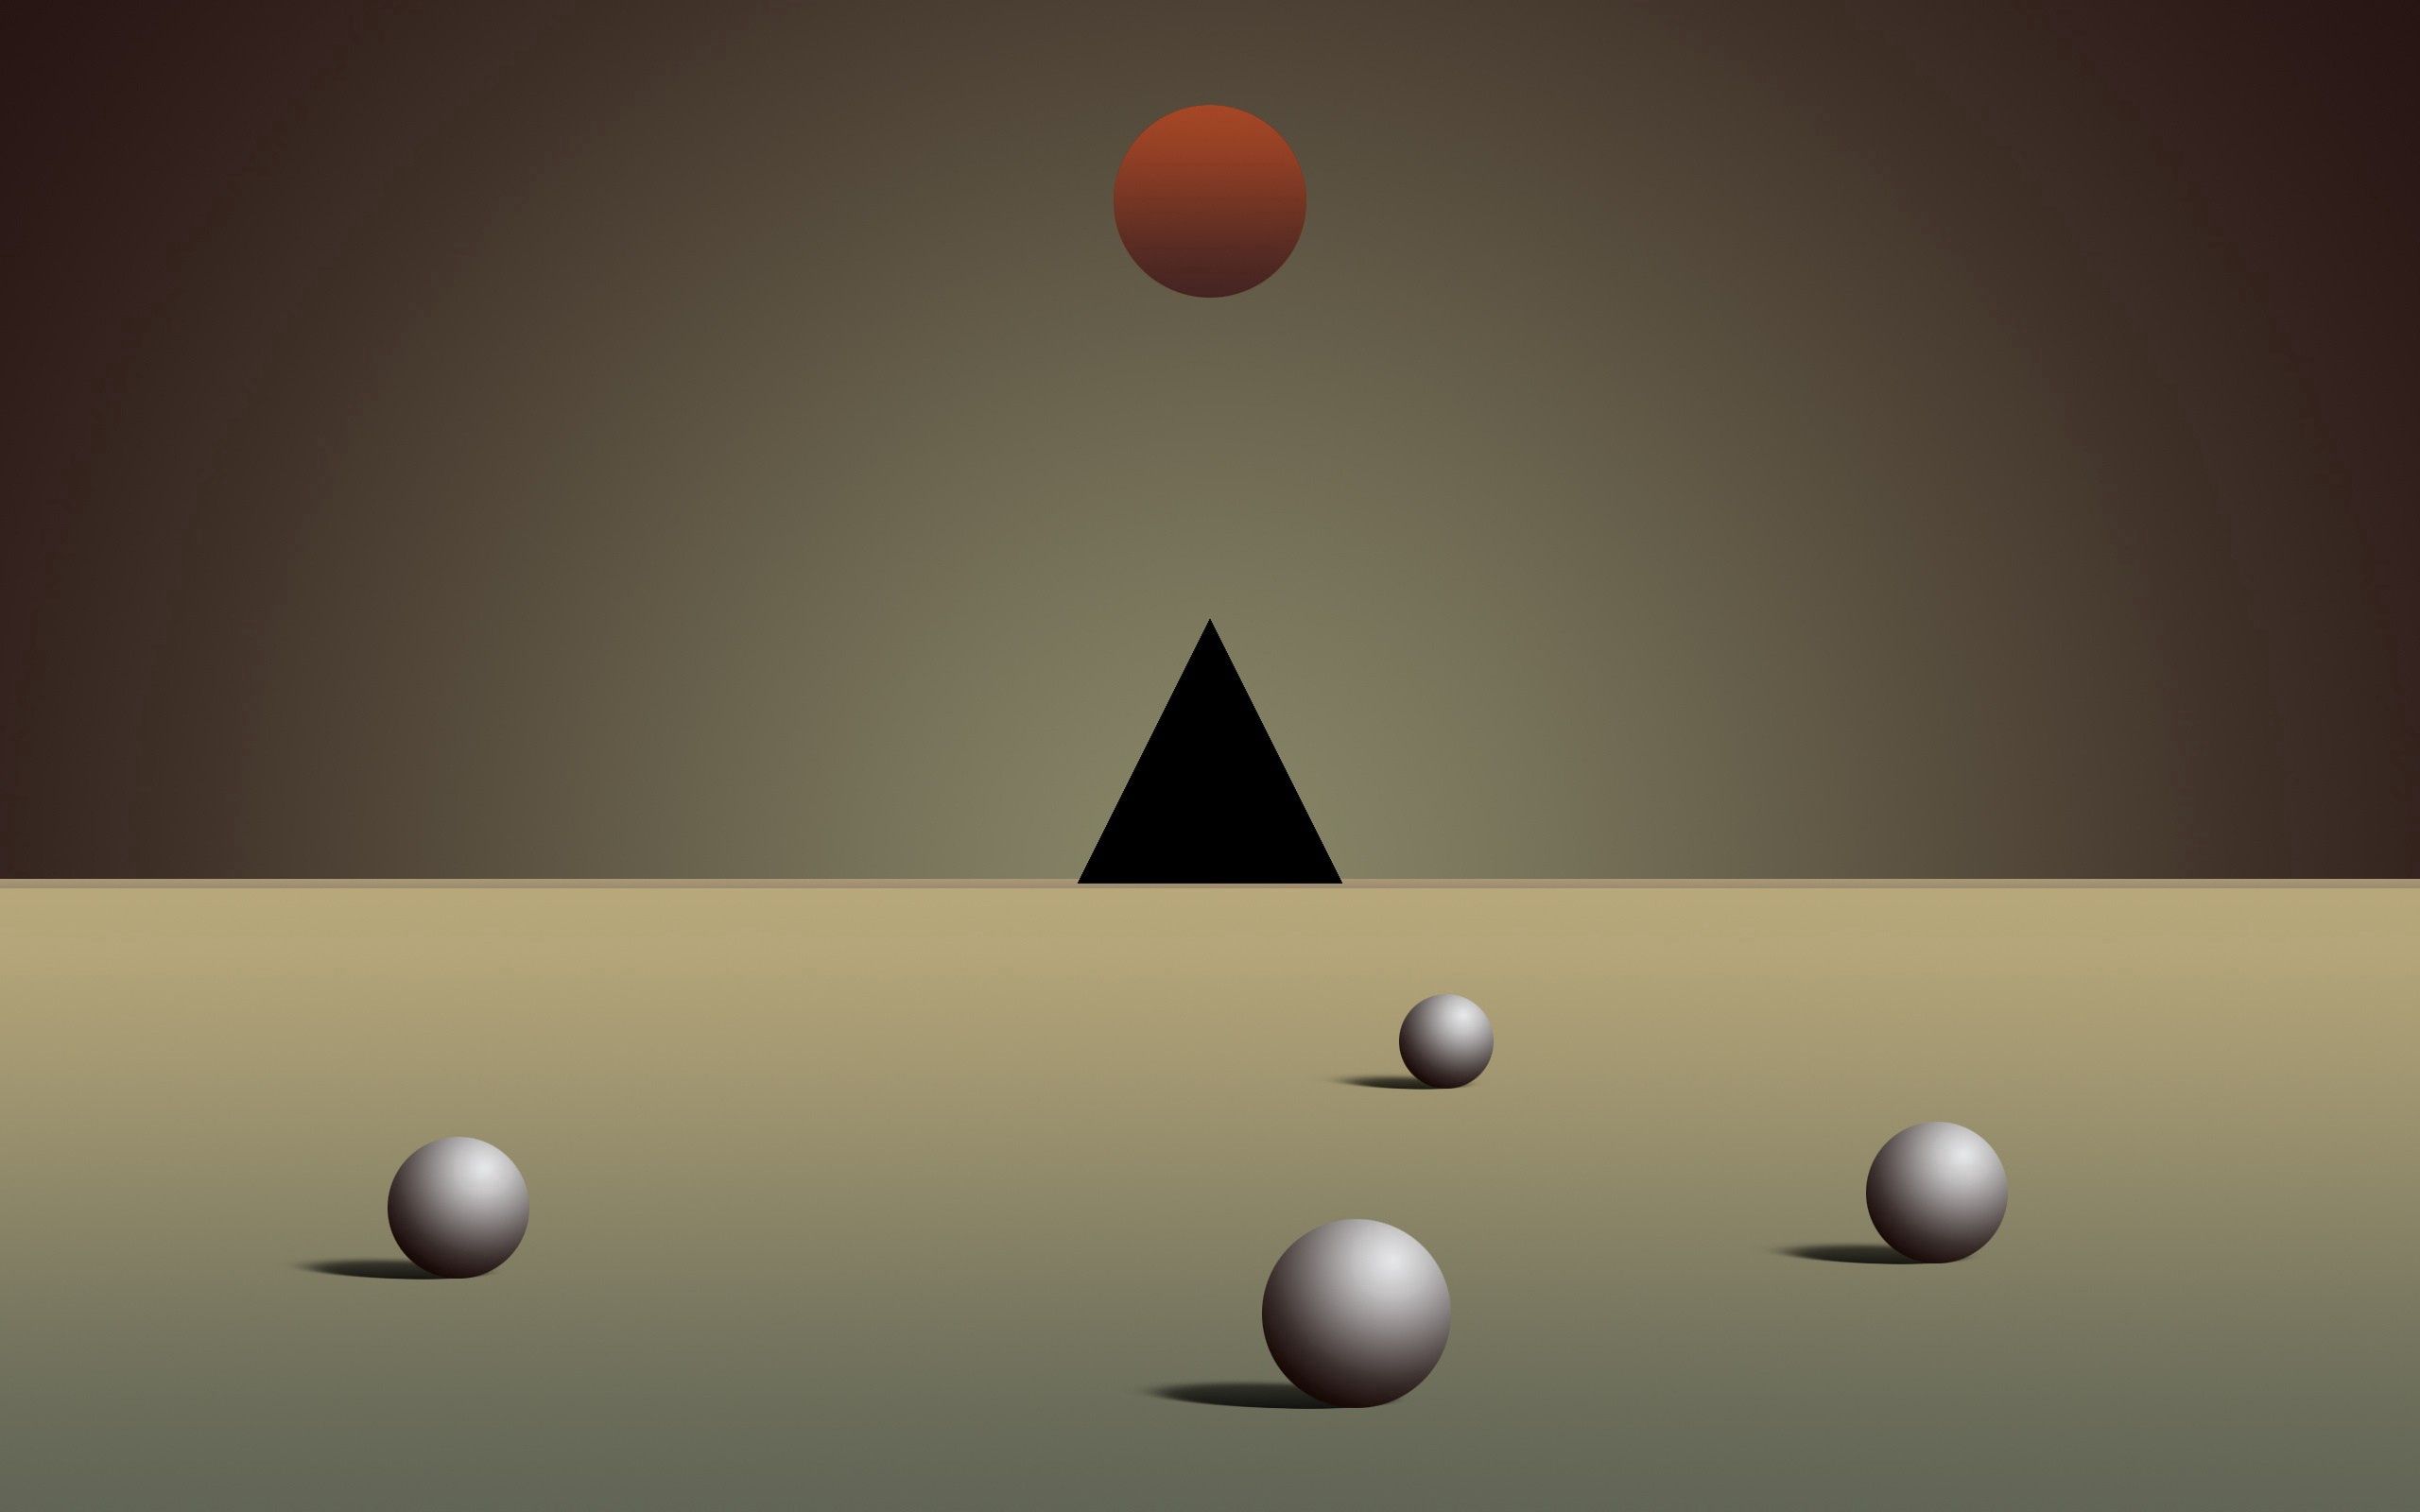 figurines, background, abstract, ball, figures, triangle